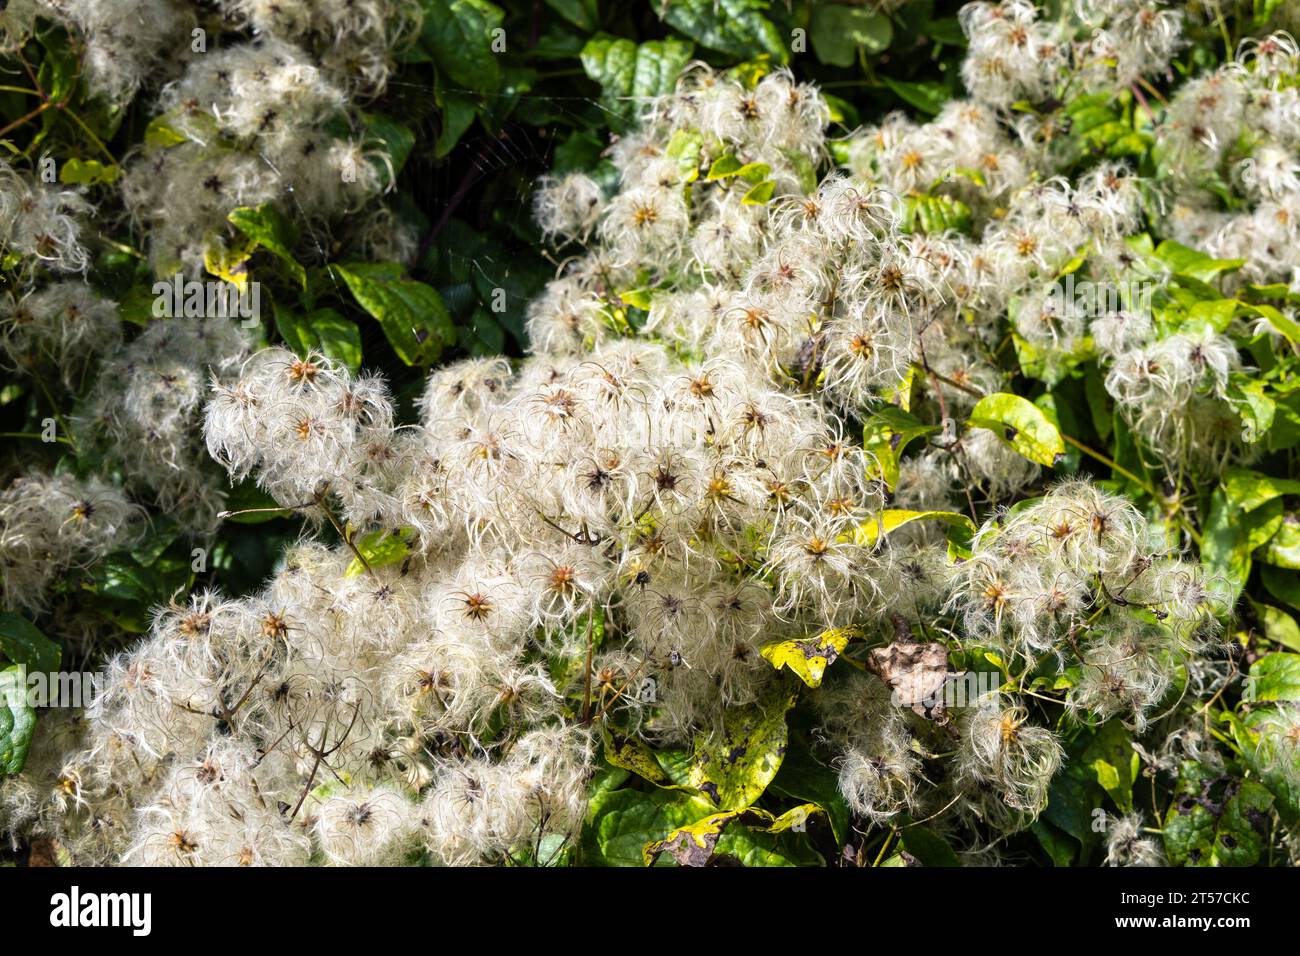 Clematis seed heads, Marden Park, Oxted Downs, Surrey, England Stock Photo